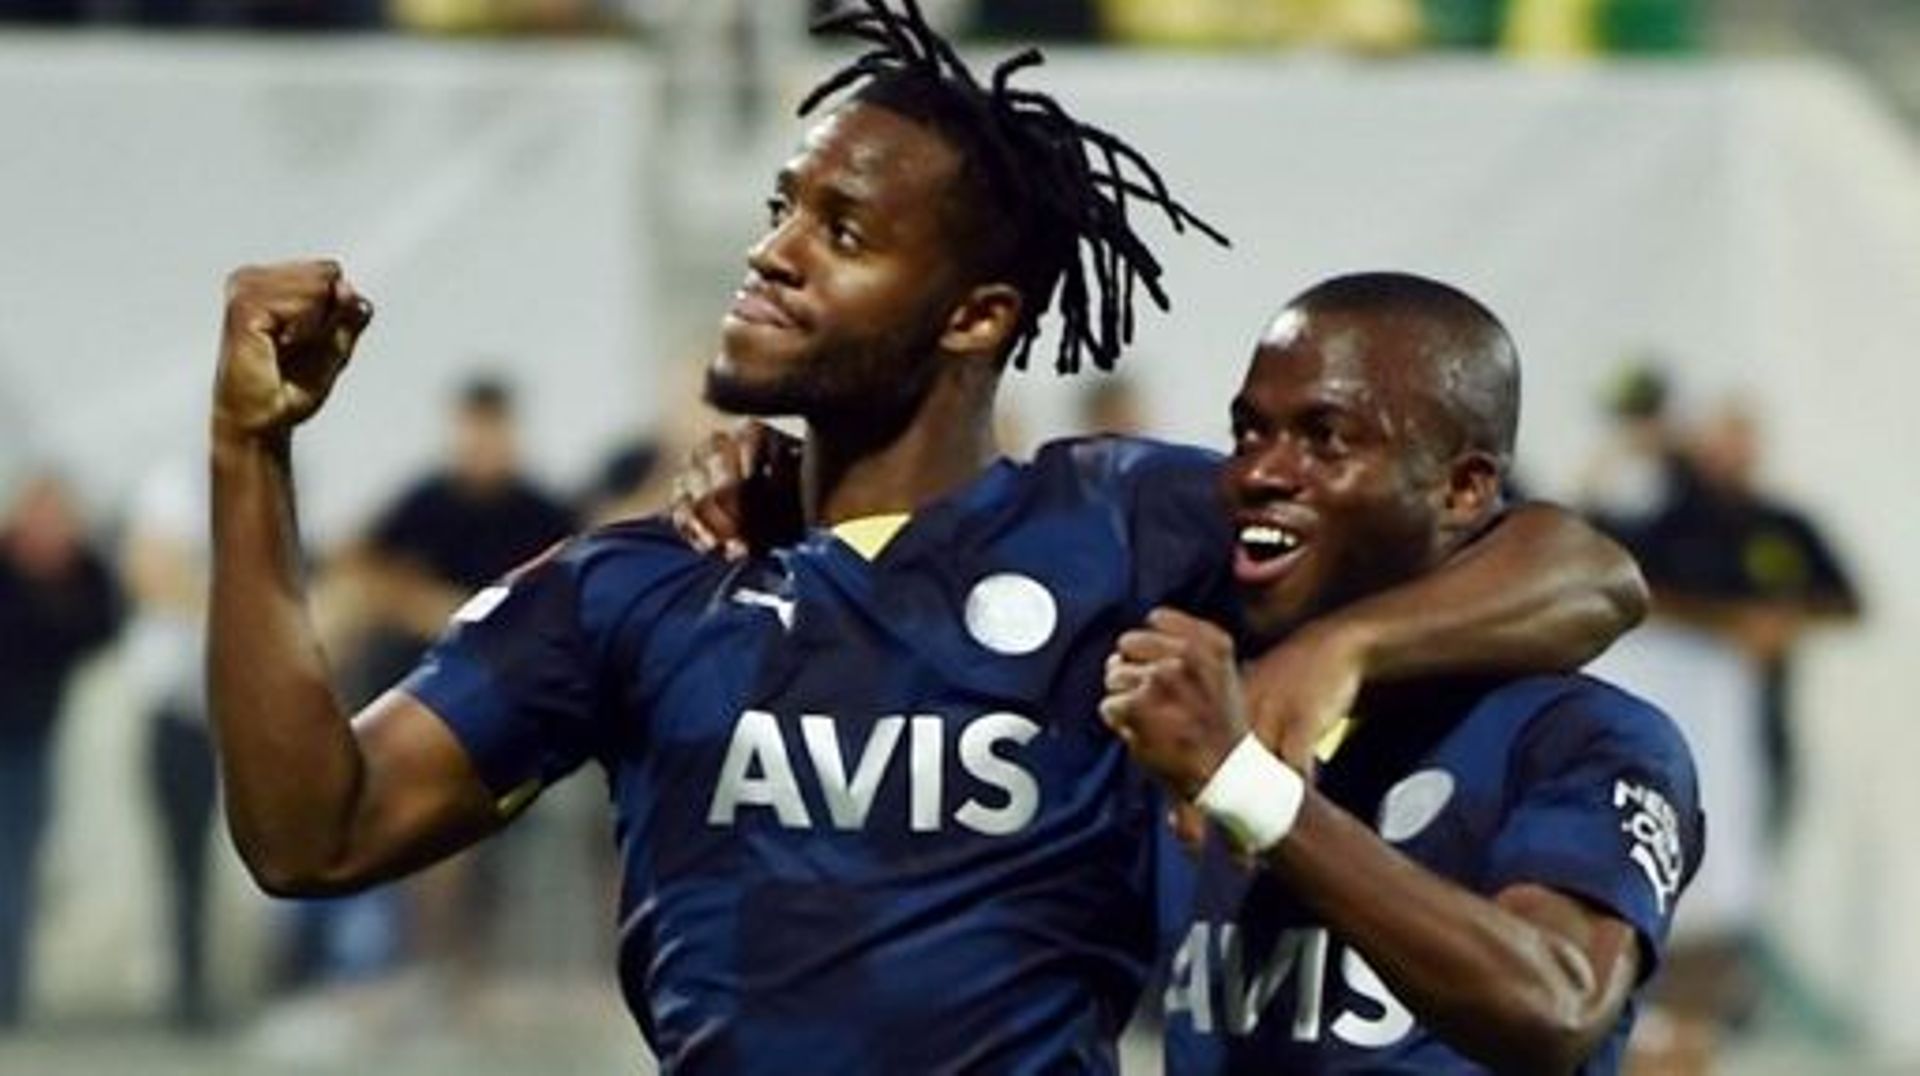 Fenerbahce's Belgian forward Michy Batshuayi (L) celebrates, with Fenerbahce's Ecuadorian forward Enner Valencia, after scoring the second goal during the UEFA Europa League group B football match between Cyprus' AEK Larnaca and Turkey's Fenerbahce at the